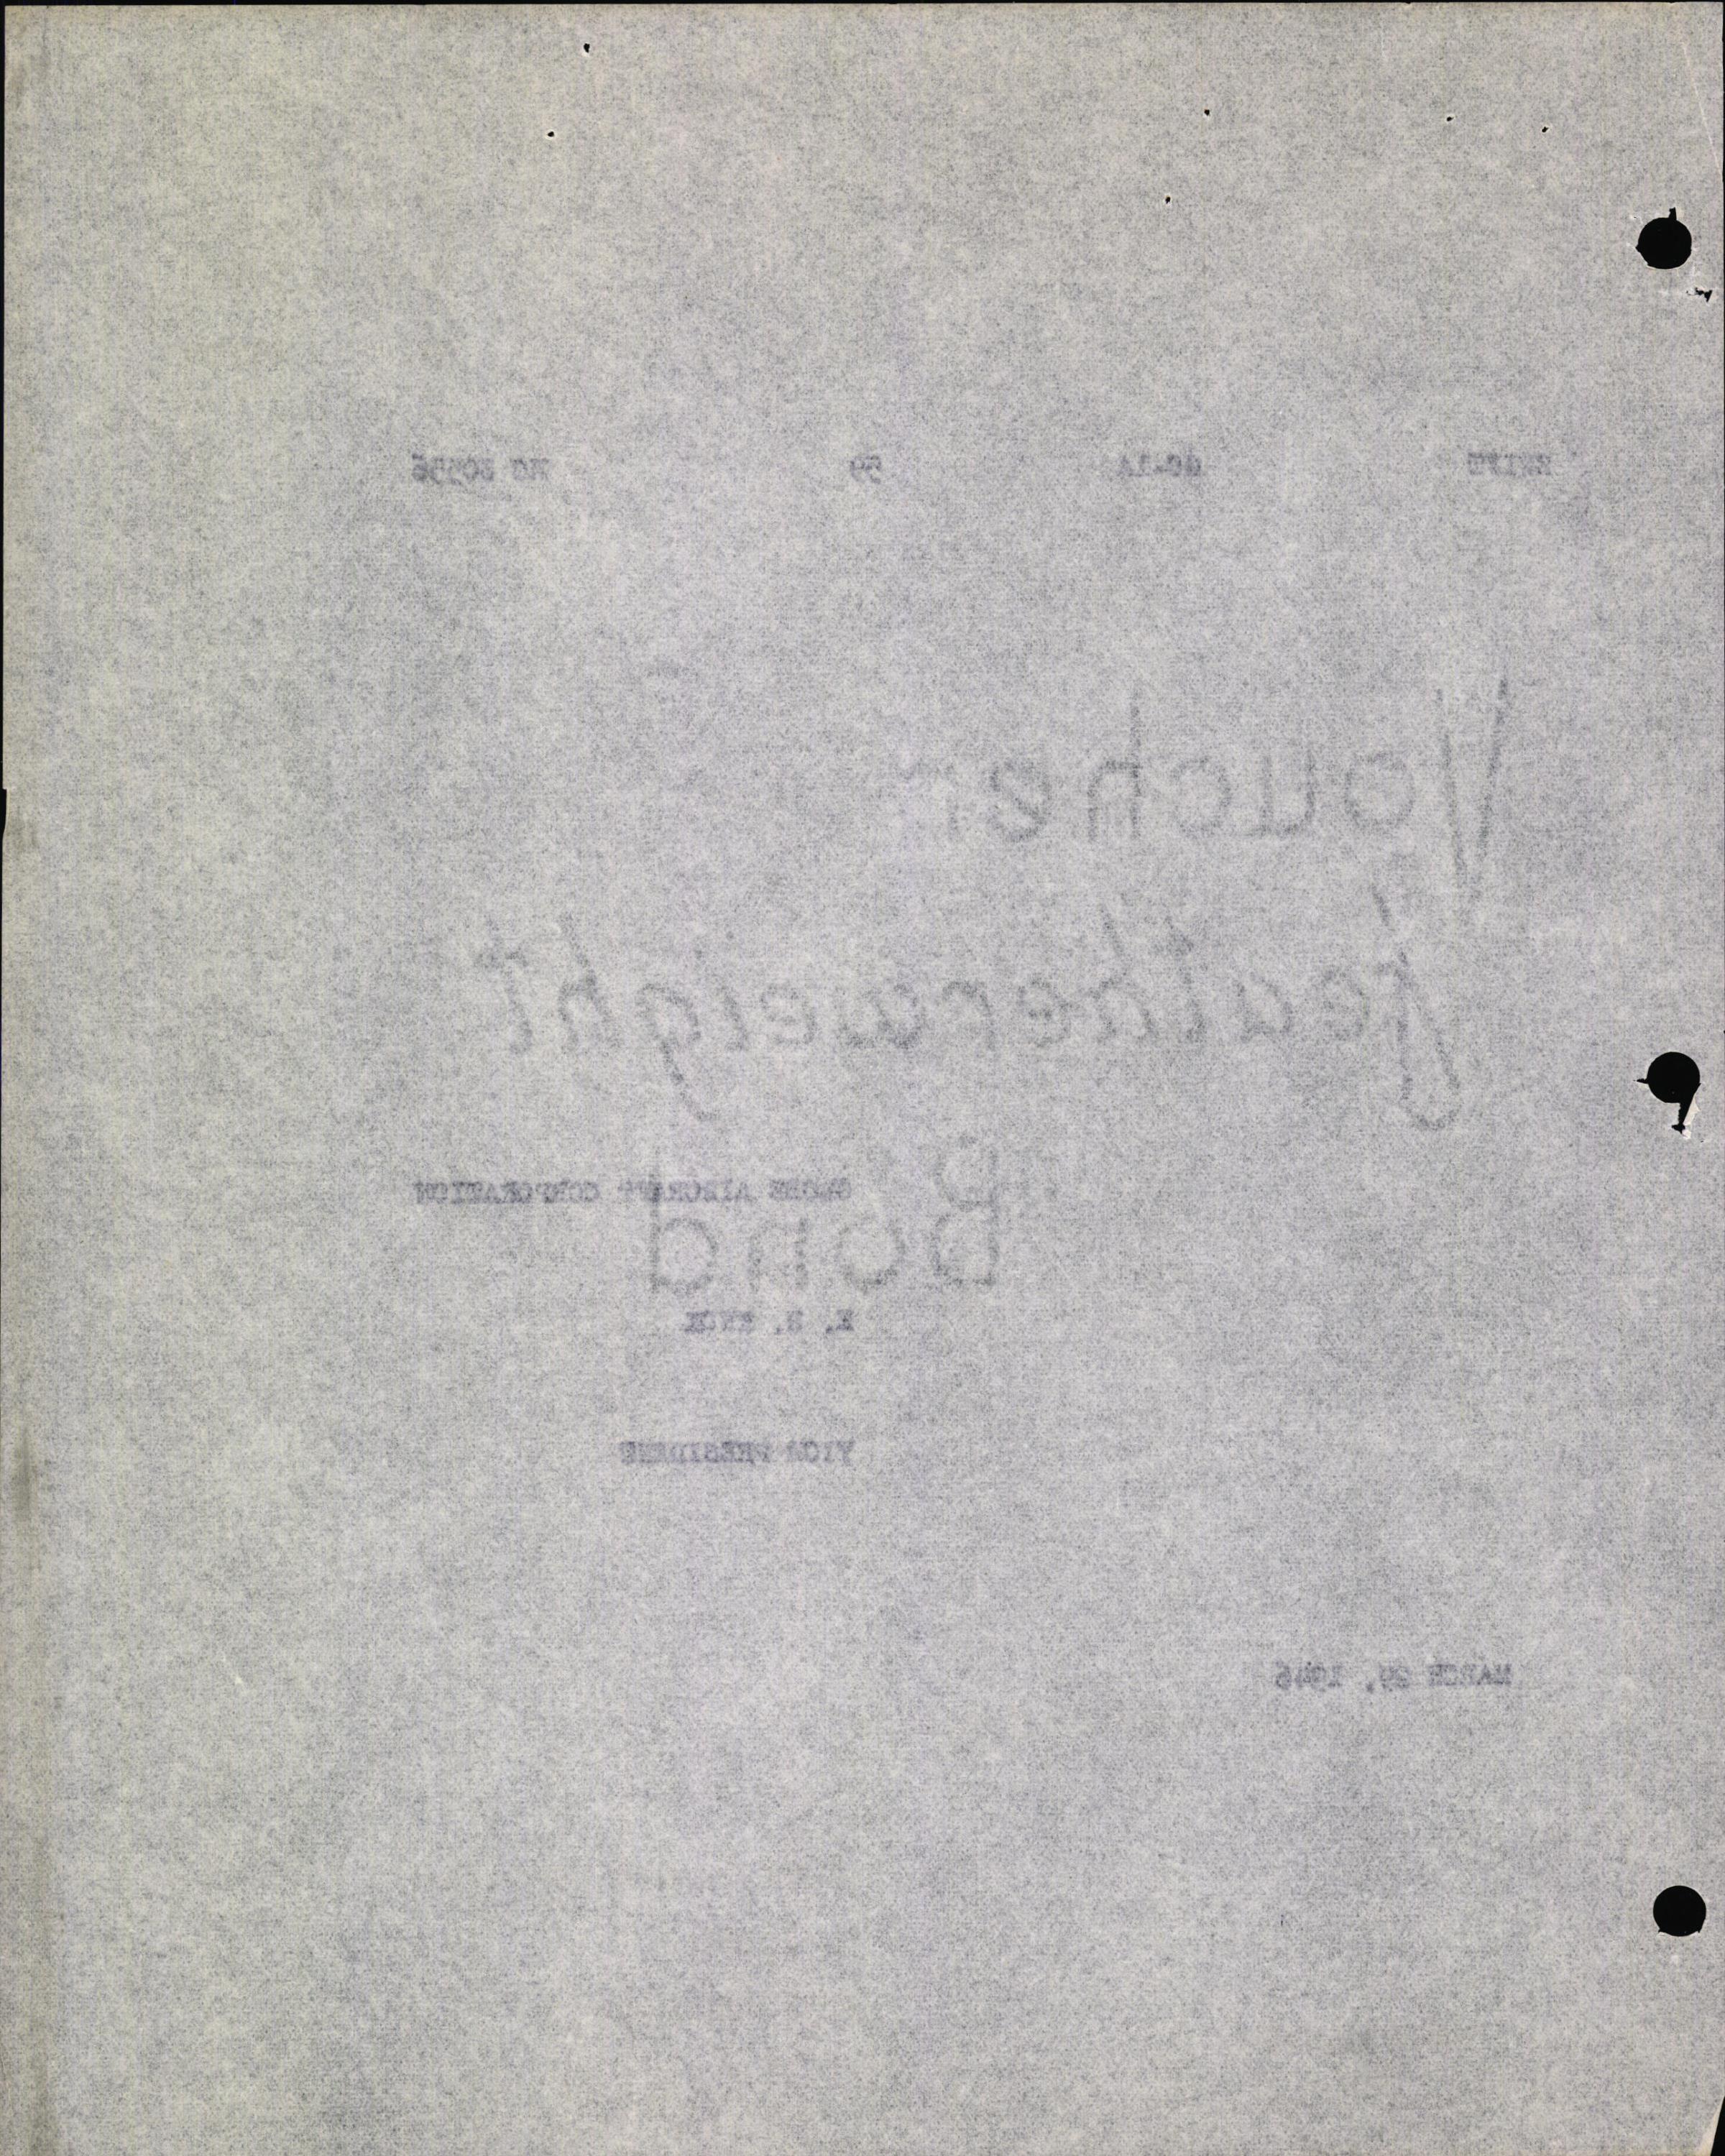 Sample page 6 from AirCorps Library document: Technical Information for Serial Number 59